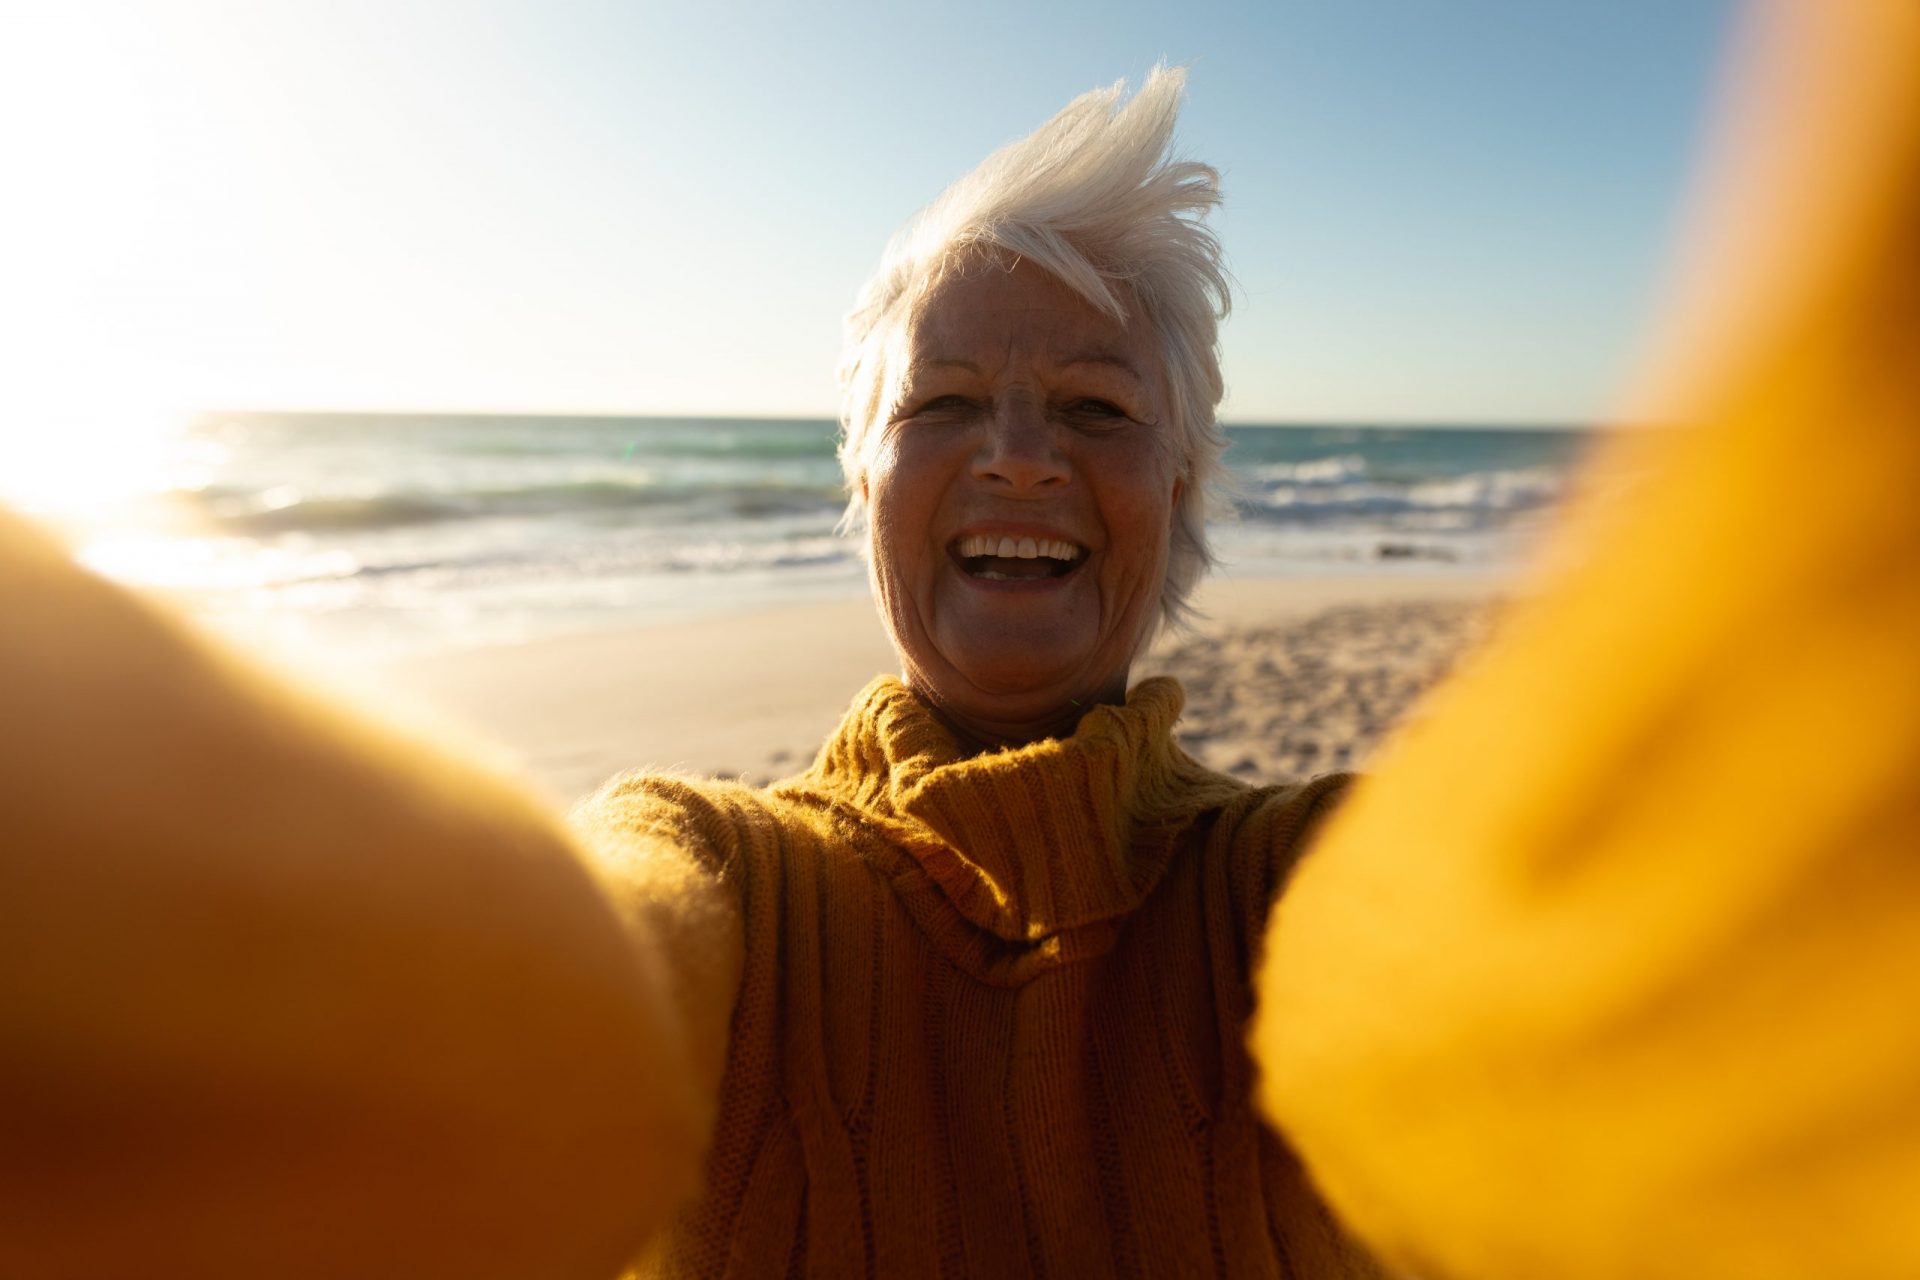 Front view of a senior Caucasian woman at the beach in the sun, smiling to camera and reaching out taking a selfie with a device out of shot